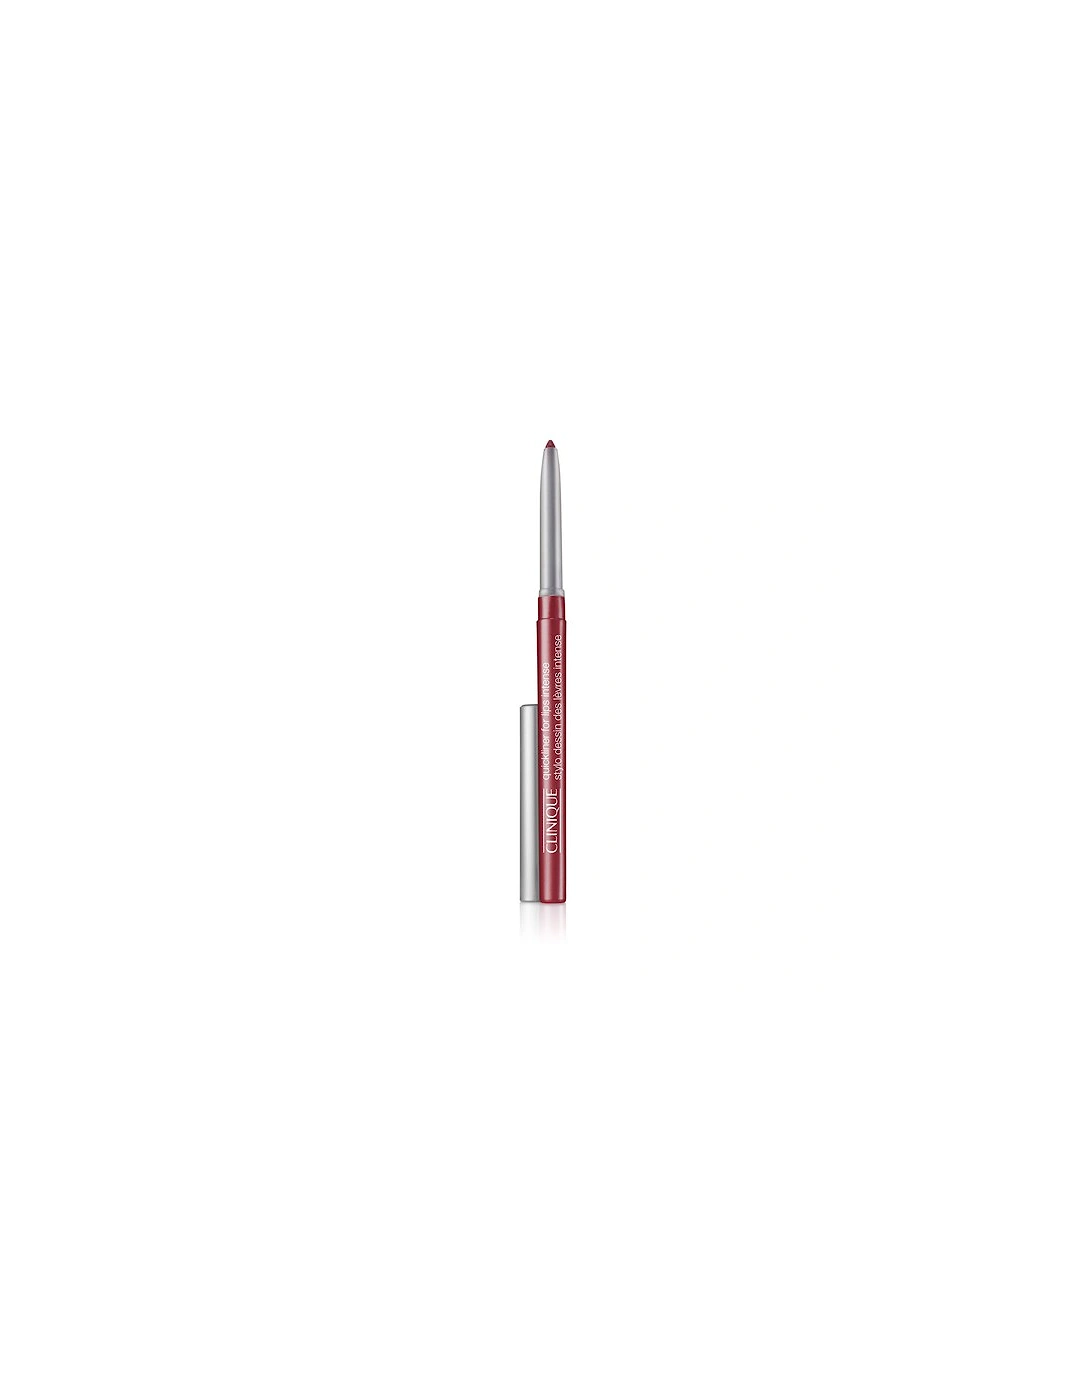 Quickliner for Lips Intense - Intense Cosmo, 2 of 1